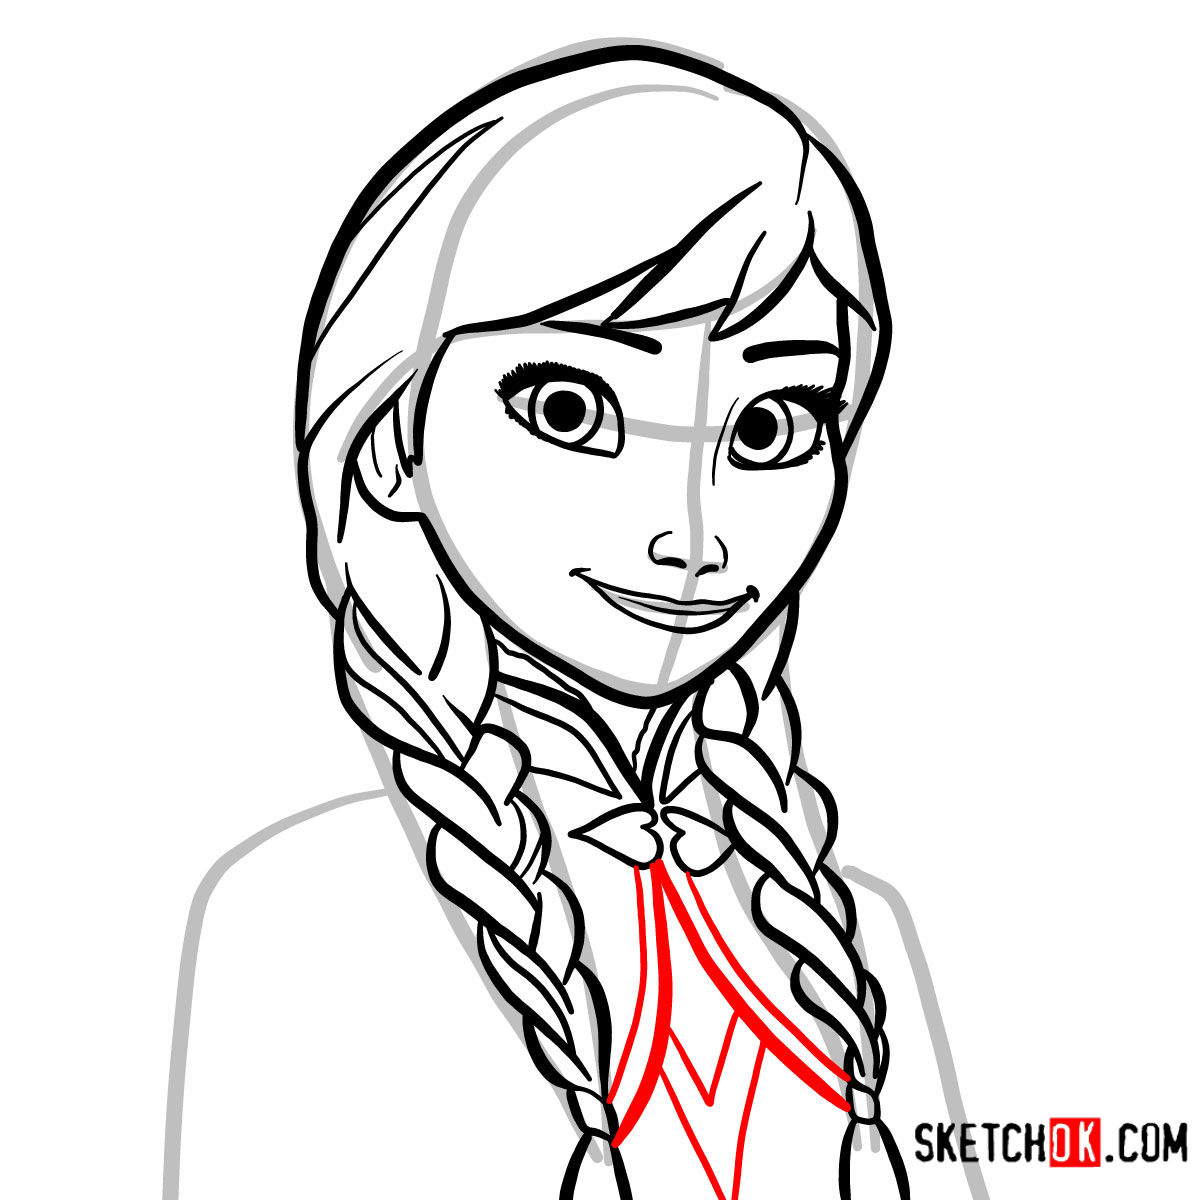 How to draw Anna's face | Frozen - Sketchok easy drawing guides